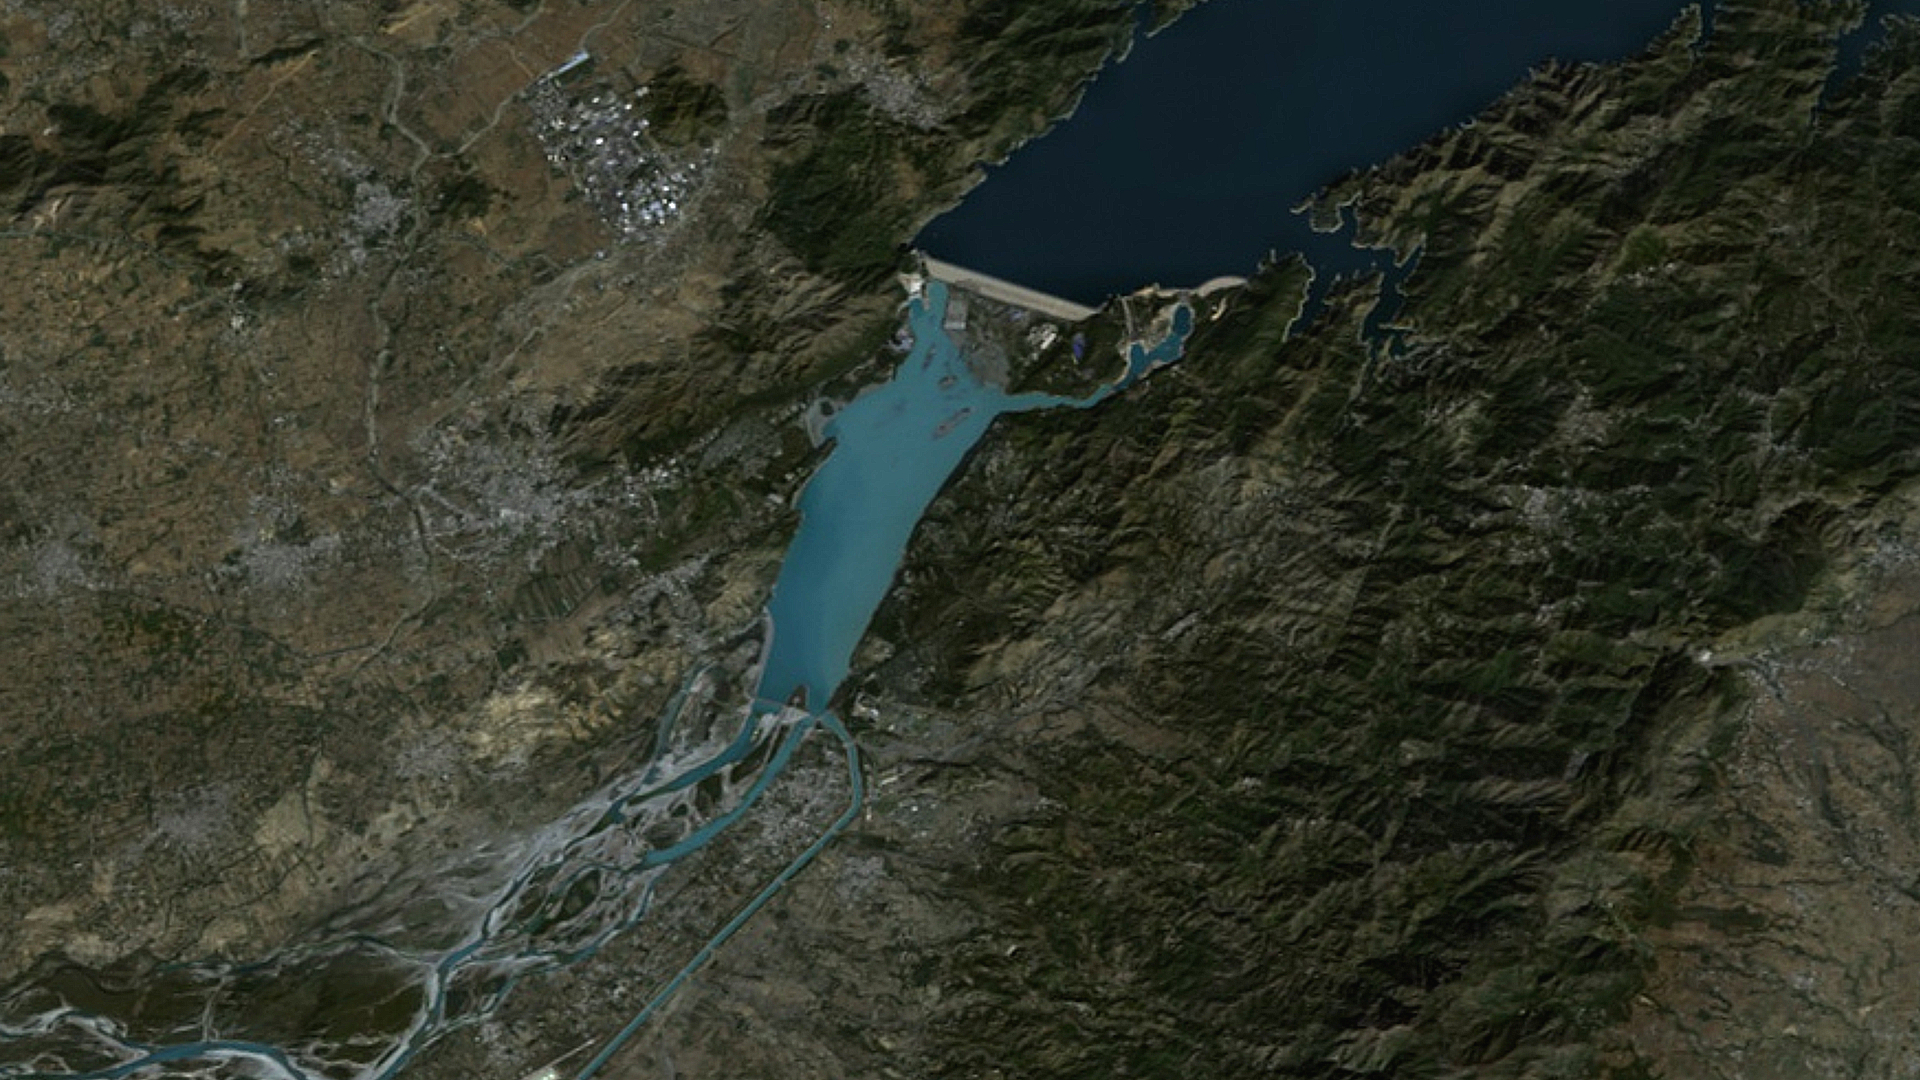 ASI - The Tarbela dam on the Indus river